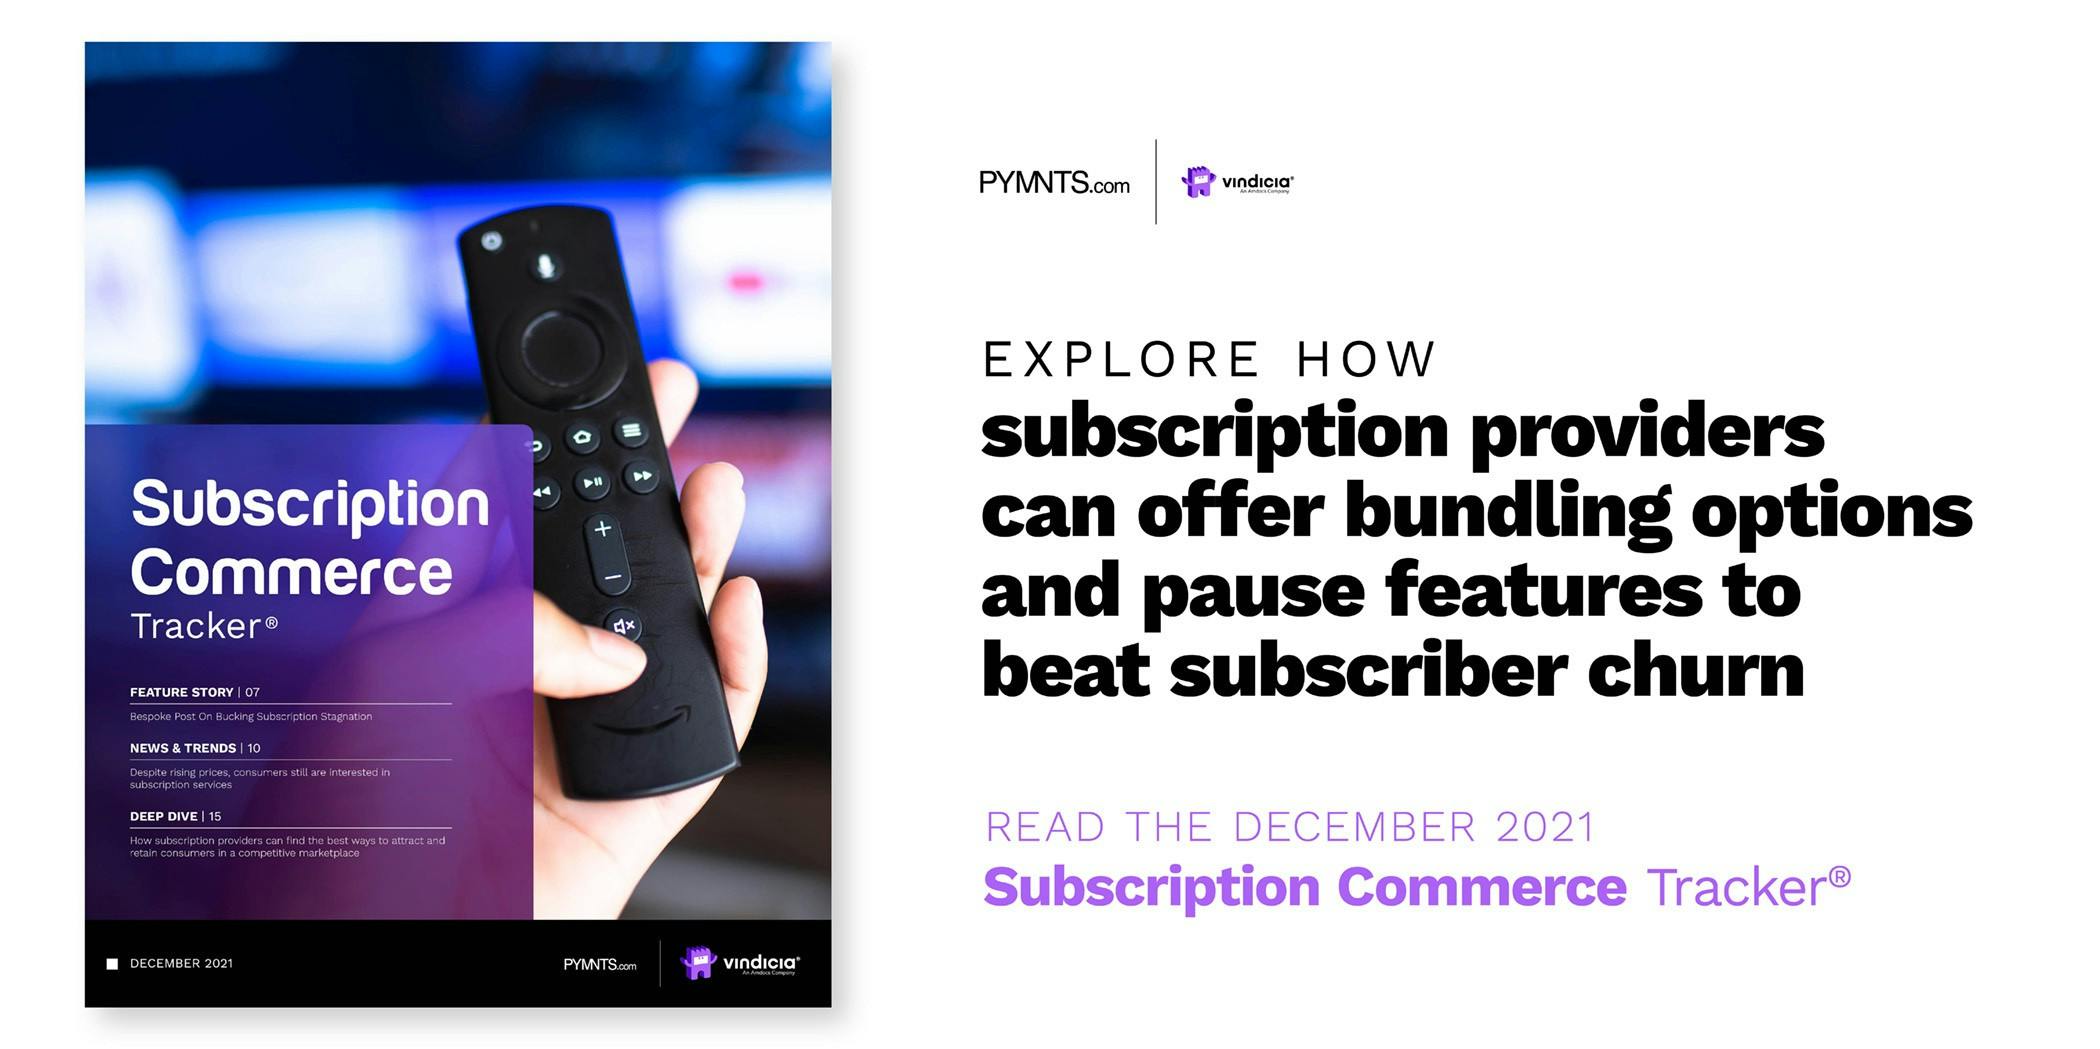 Subscription providers can offer bundling options and pause features to beat subscriber churn